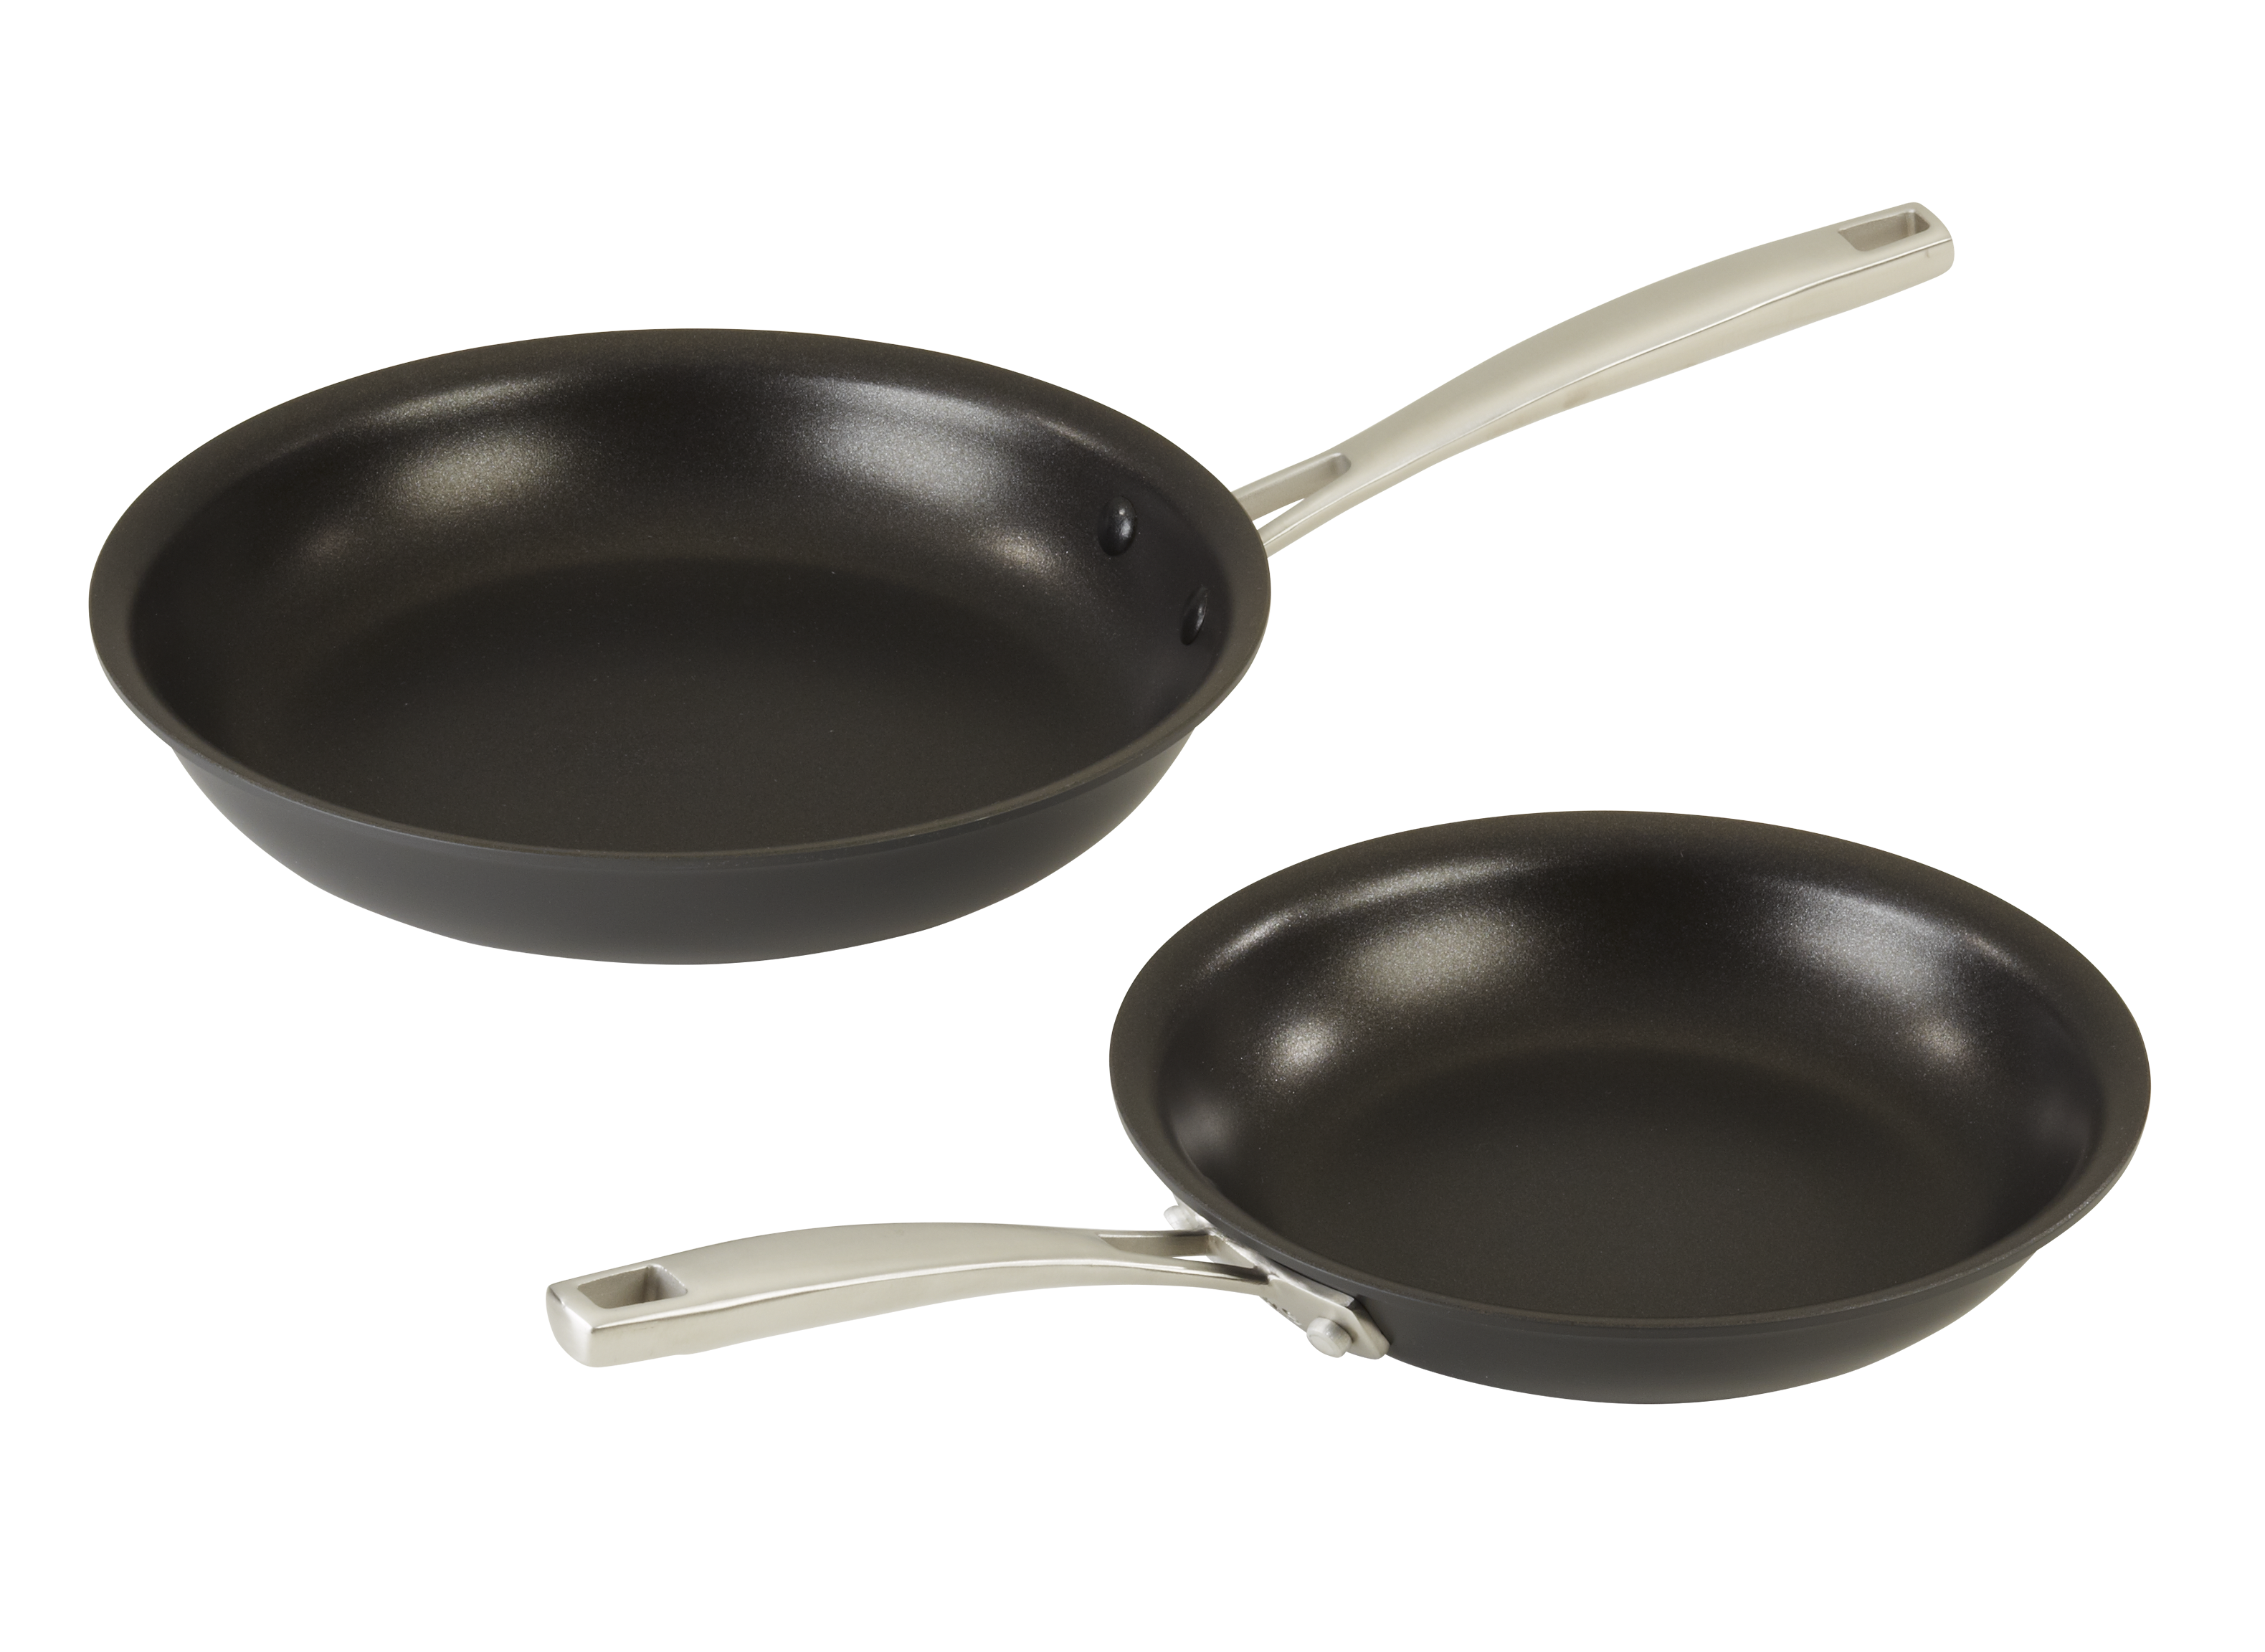 https://crdms.images.consumerreports.org/prod/products/cr/models/393394-fryingpans-cooks-signature.png